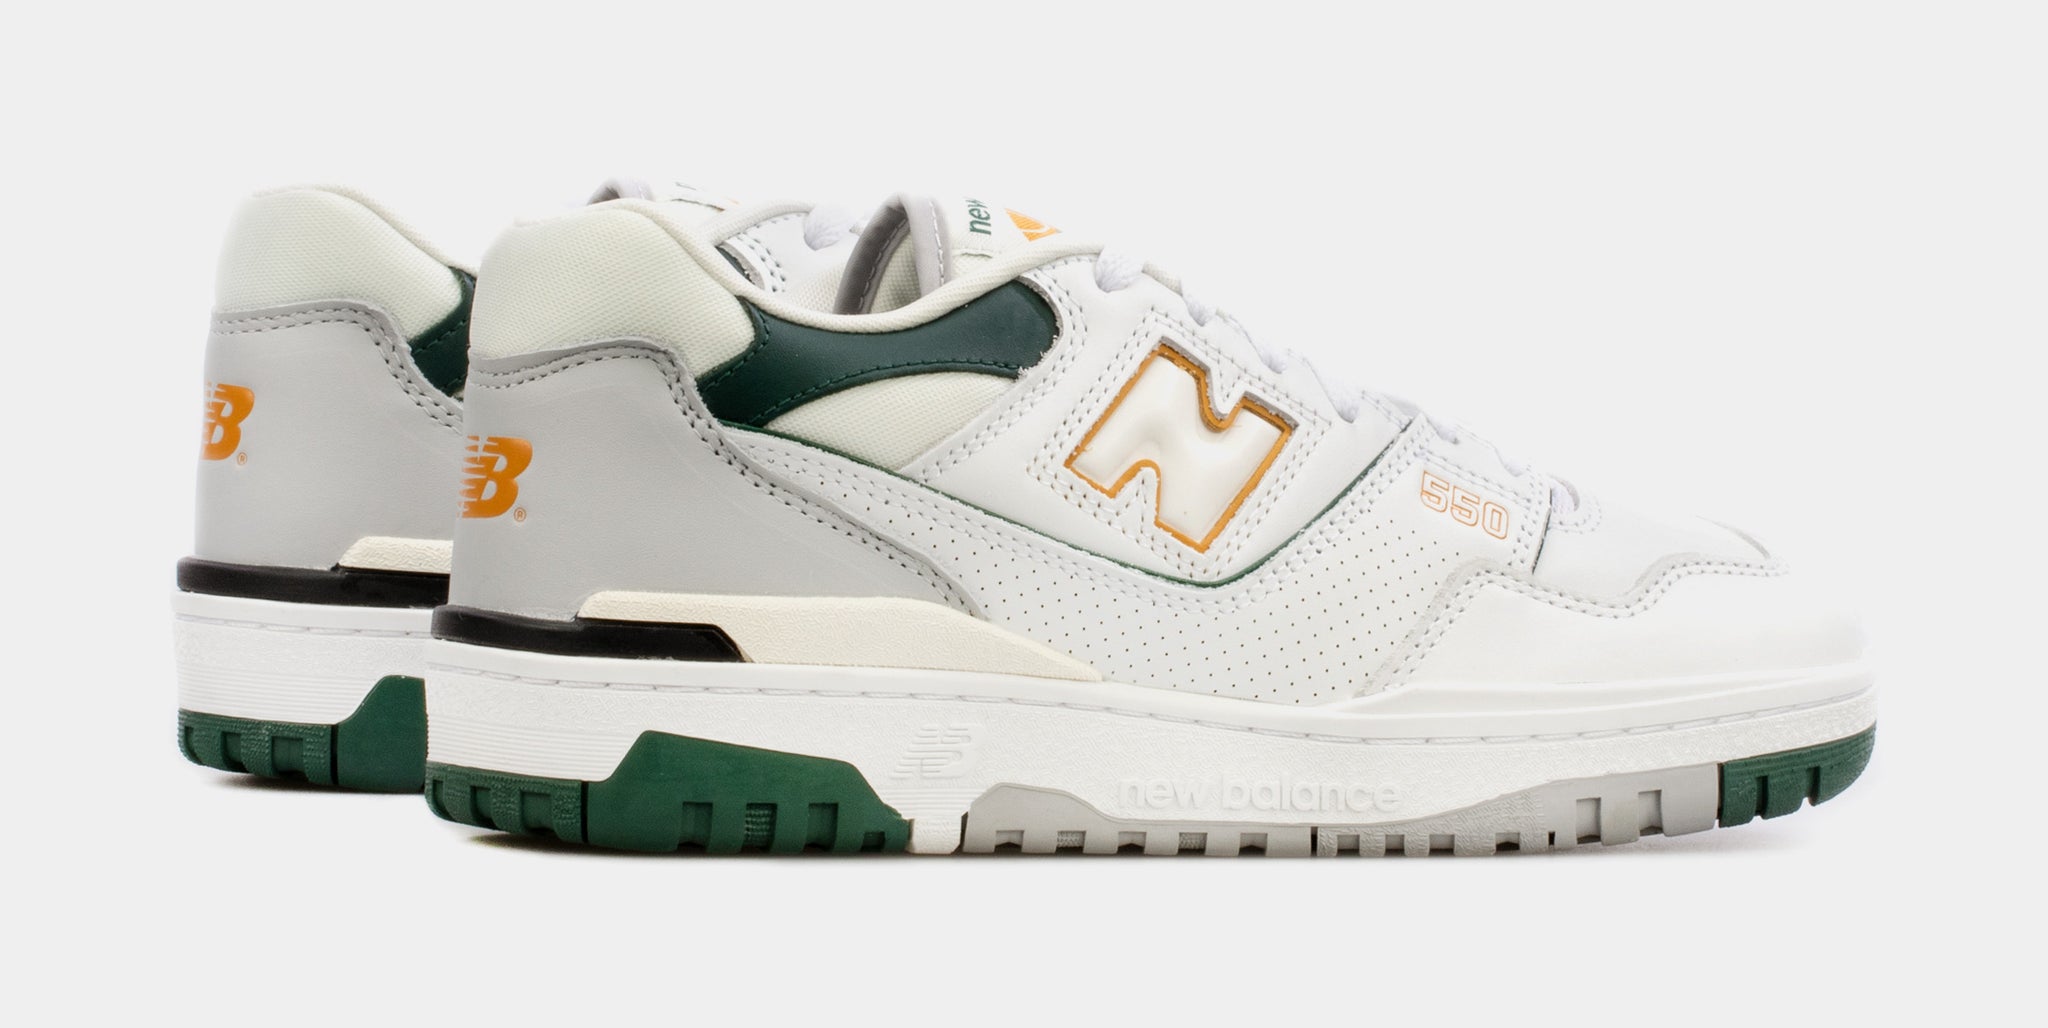 New Balance 550 Nightwatch Green Mens Lifestyle Shoes White Green